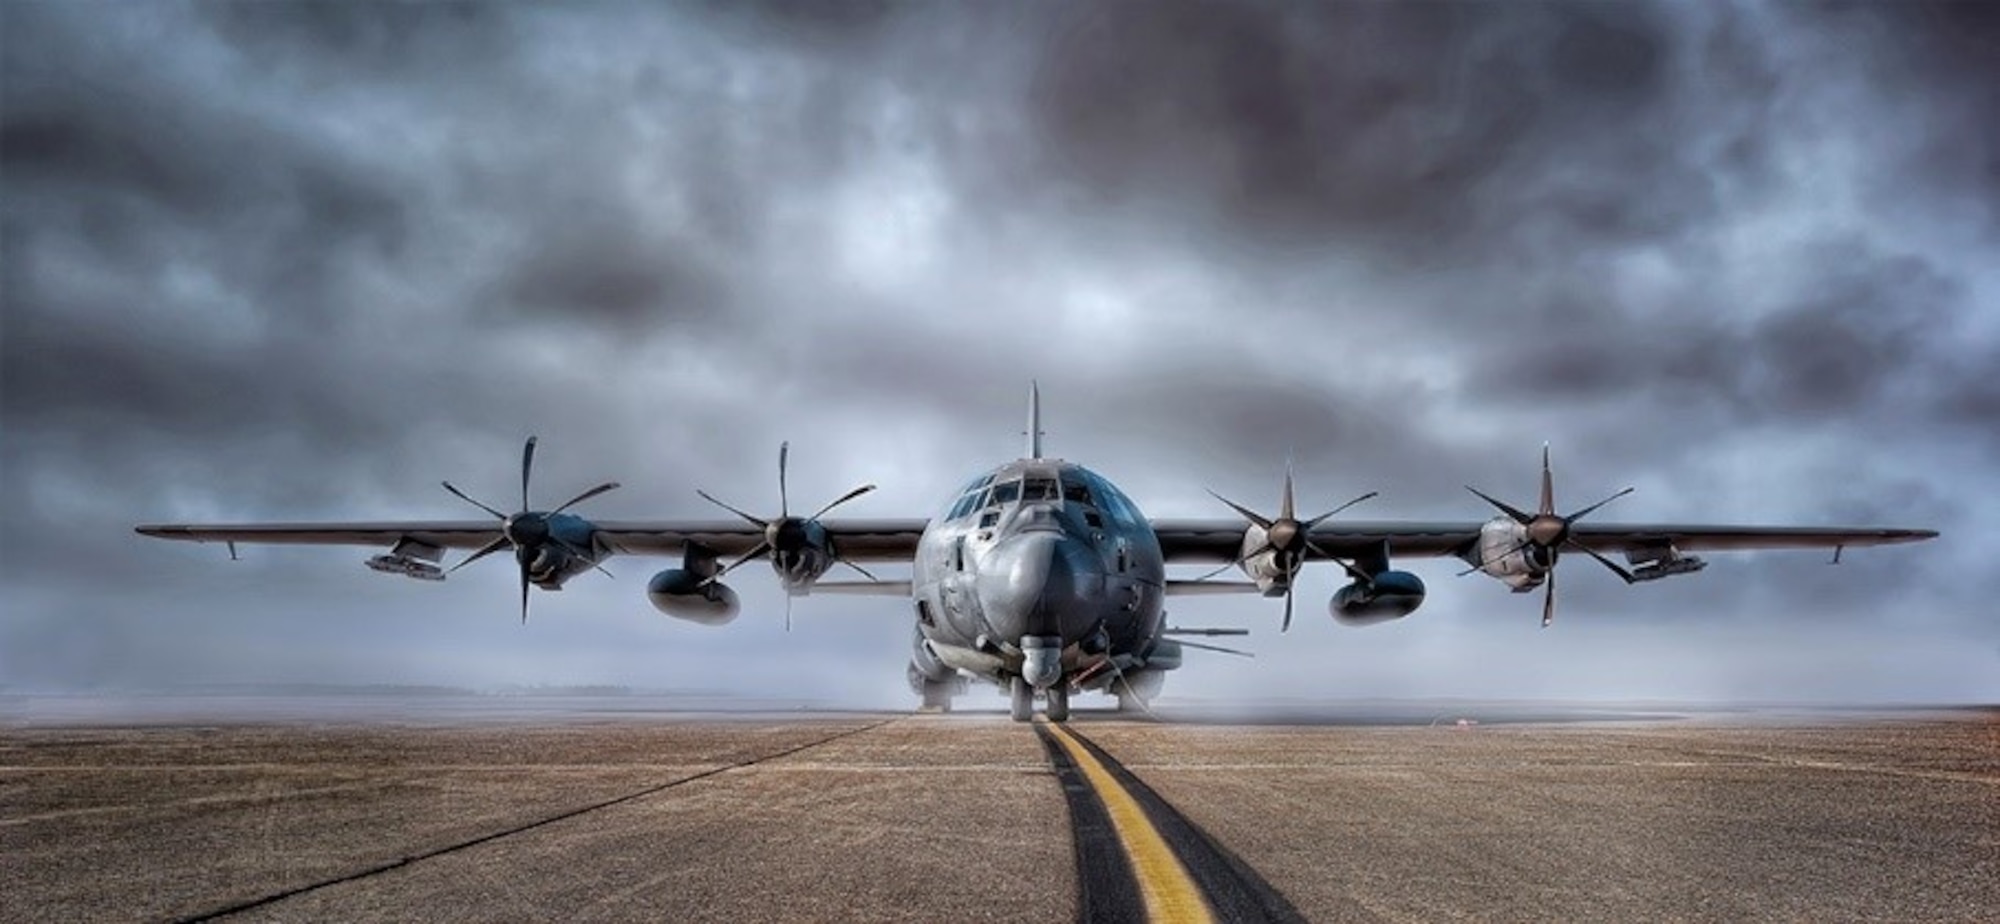 Photo of an aircraft on a flightline with clouds in the background.